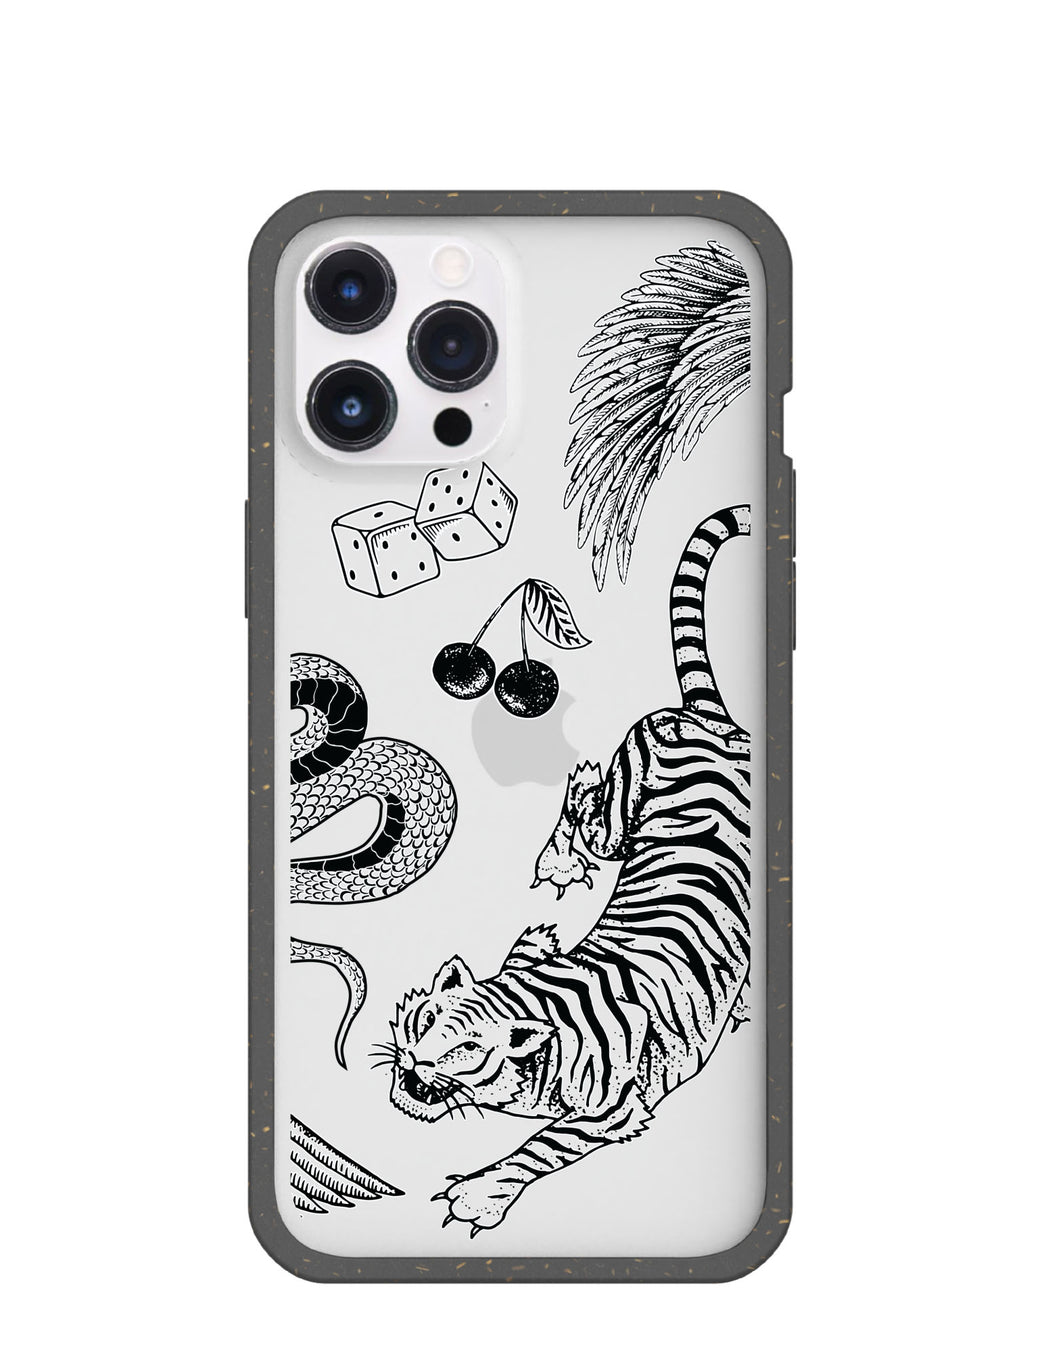 Clear Tiger Luck iPhone 12 Pro Max Case With Black Ridge